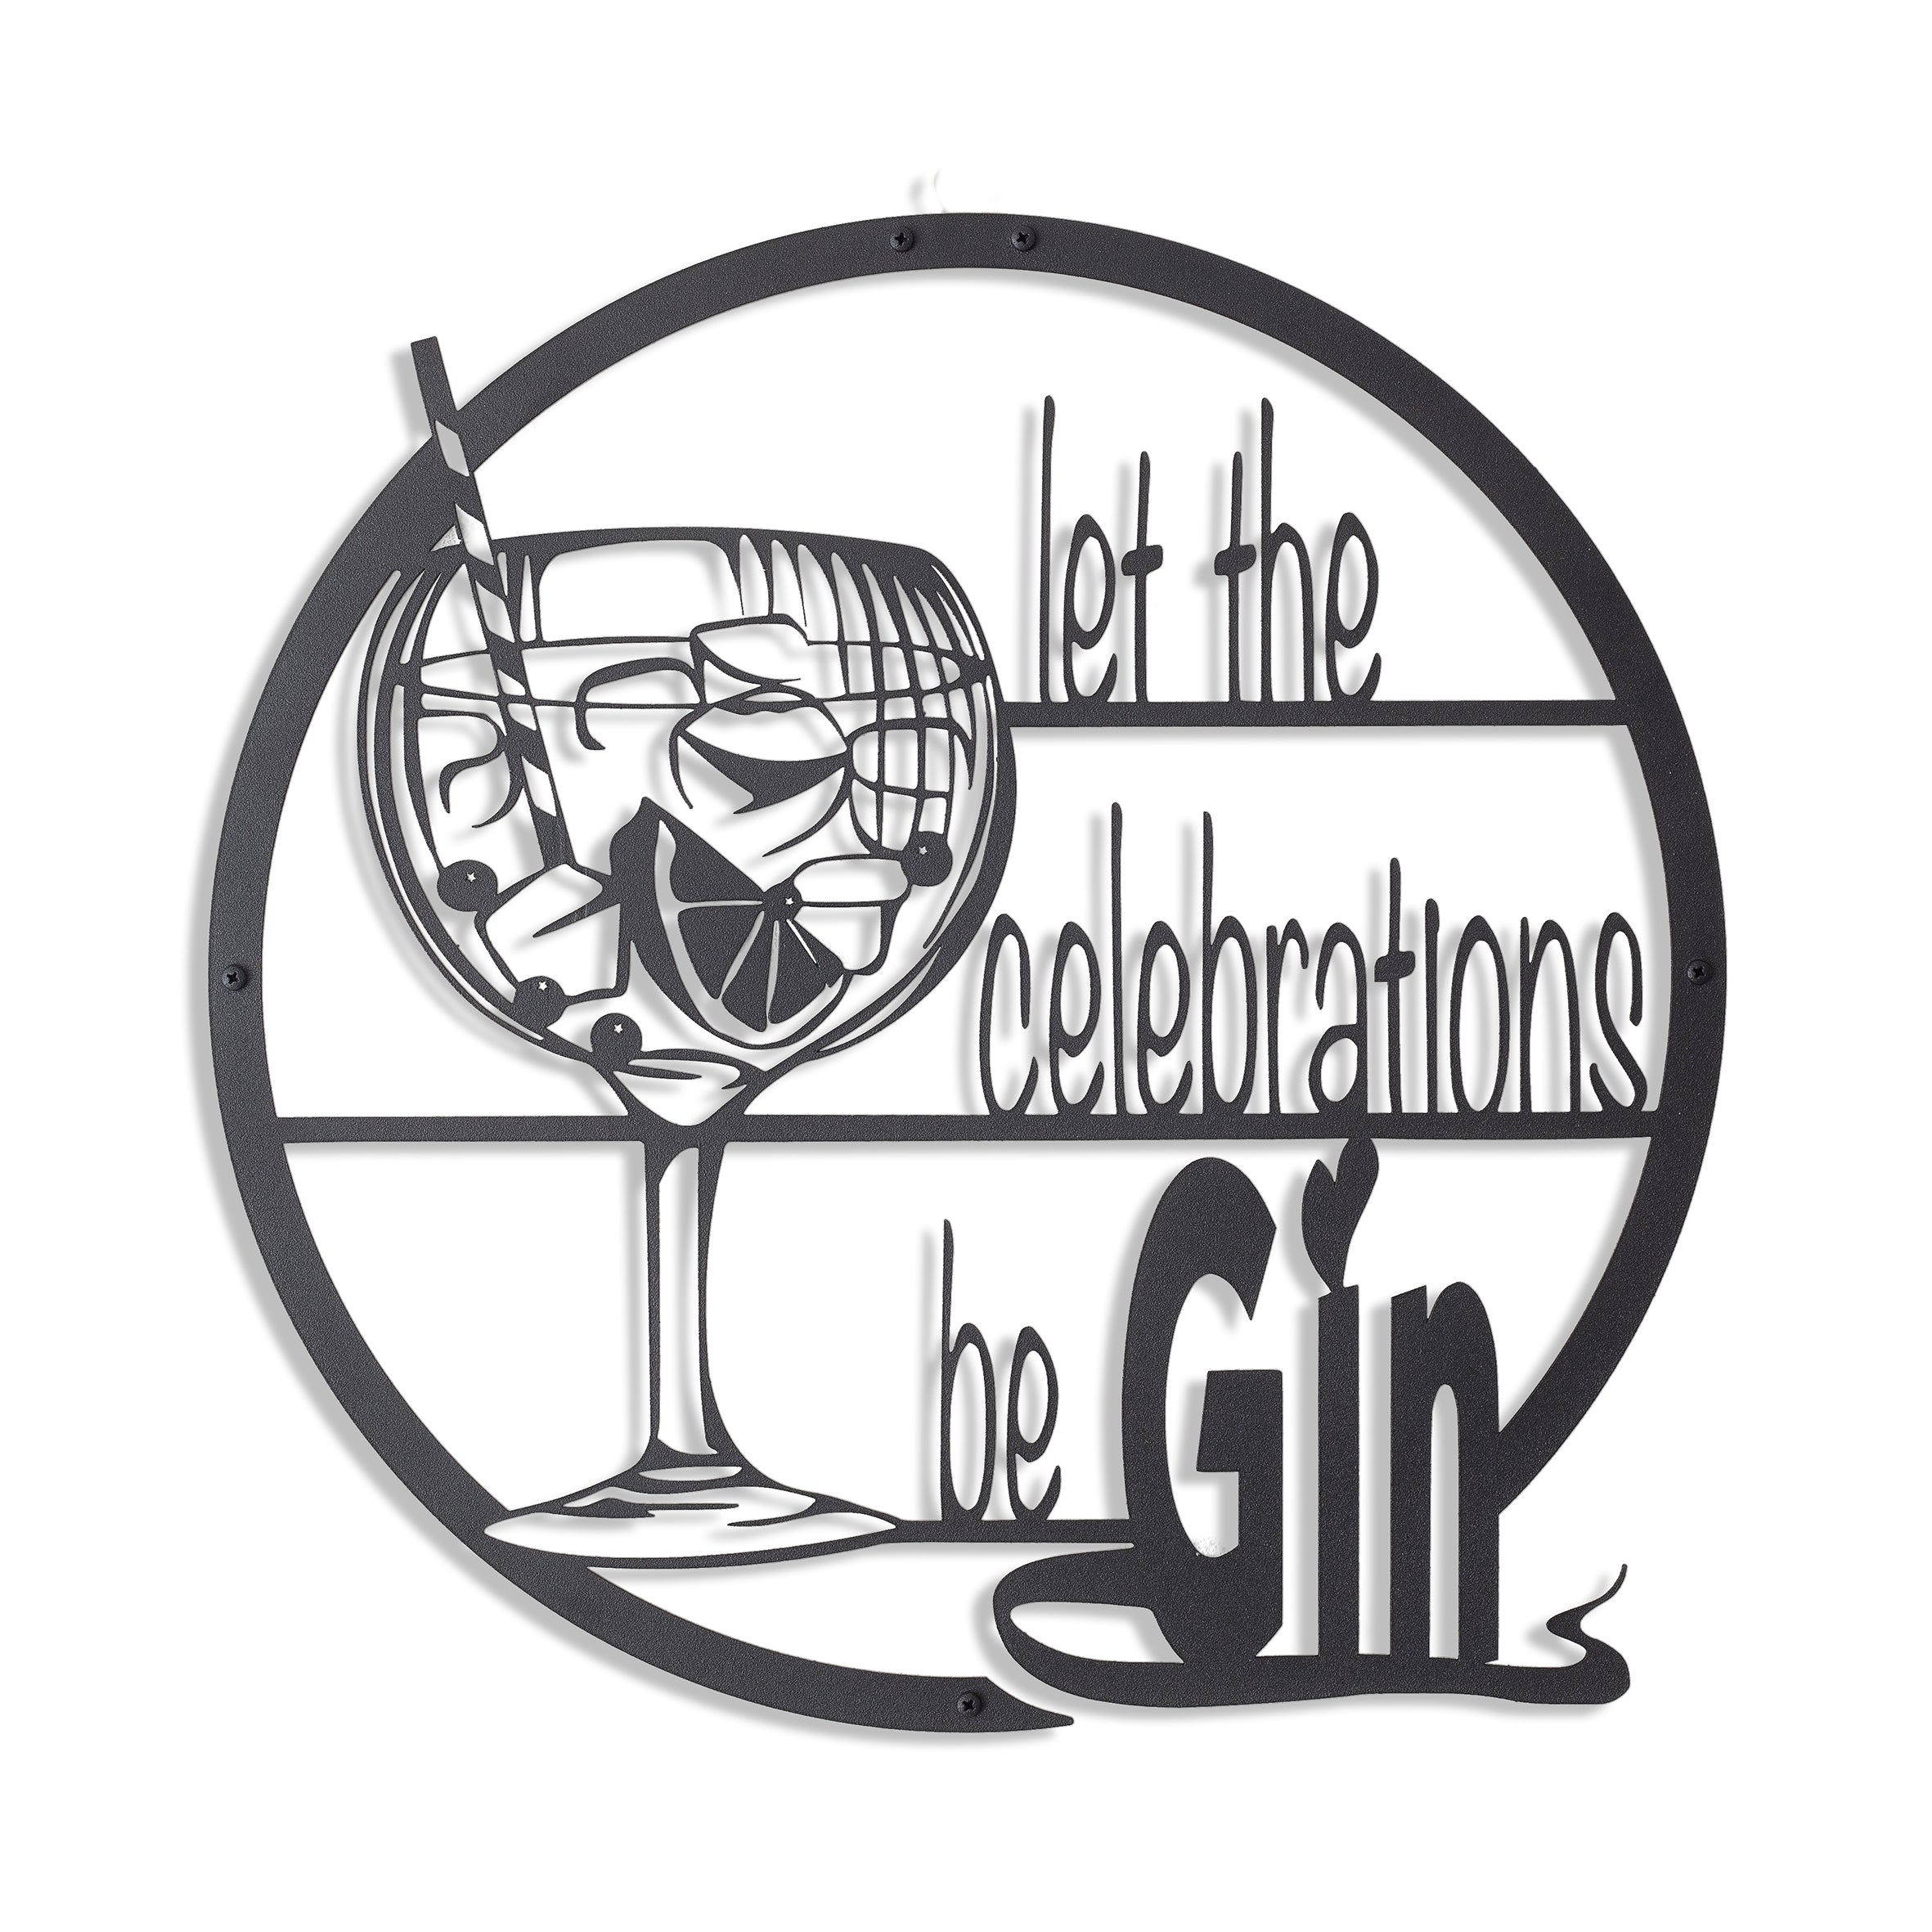 Metal wall decor with wording let the celebrations be Gin and image of gin glass with ice, lemon and straw in a round frame.